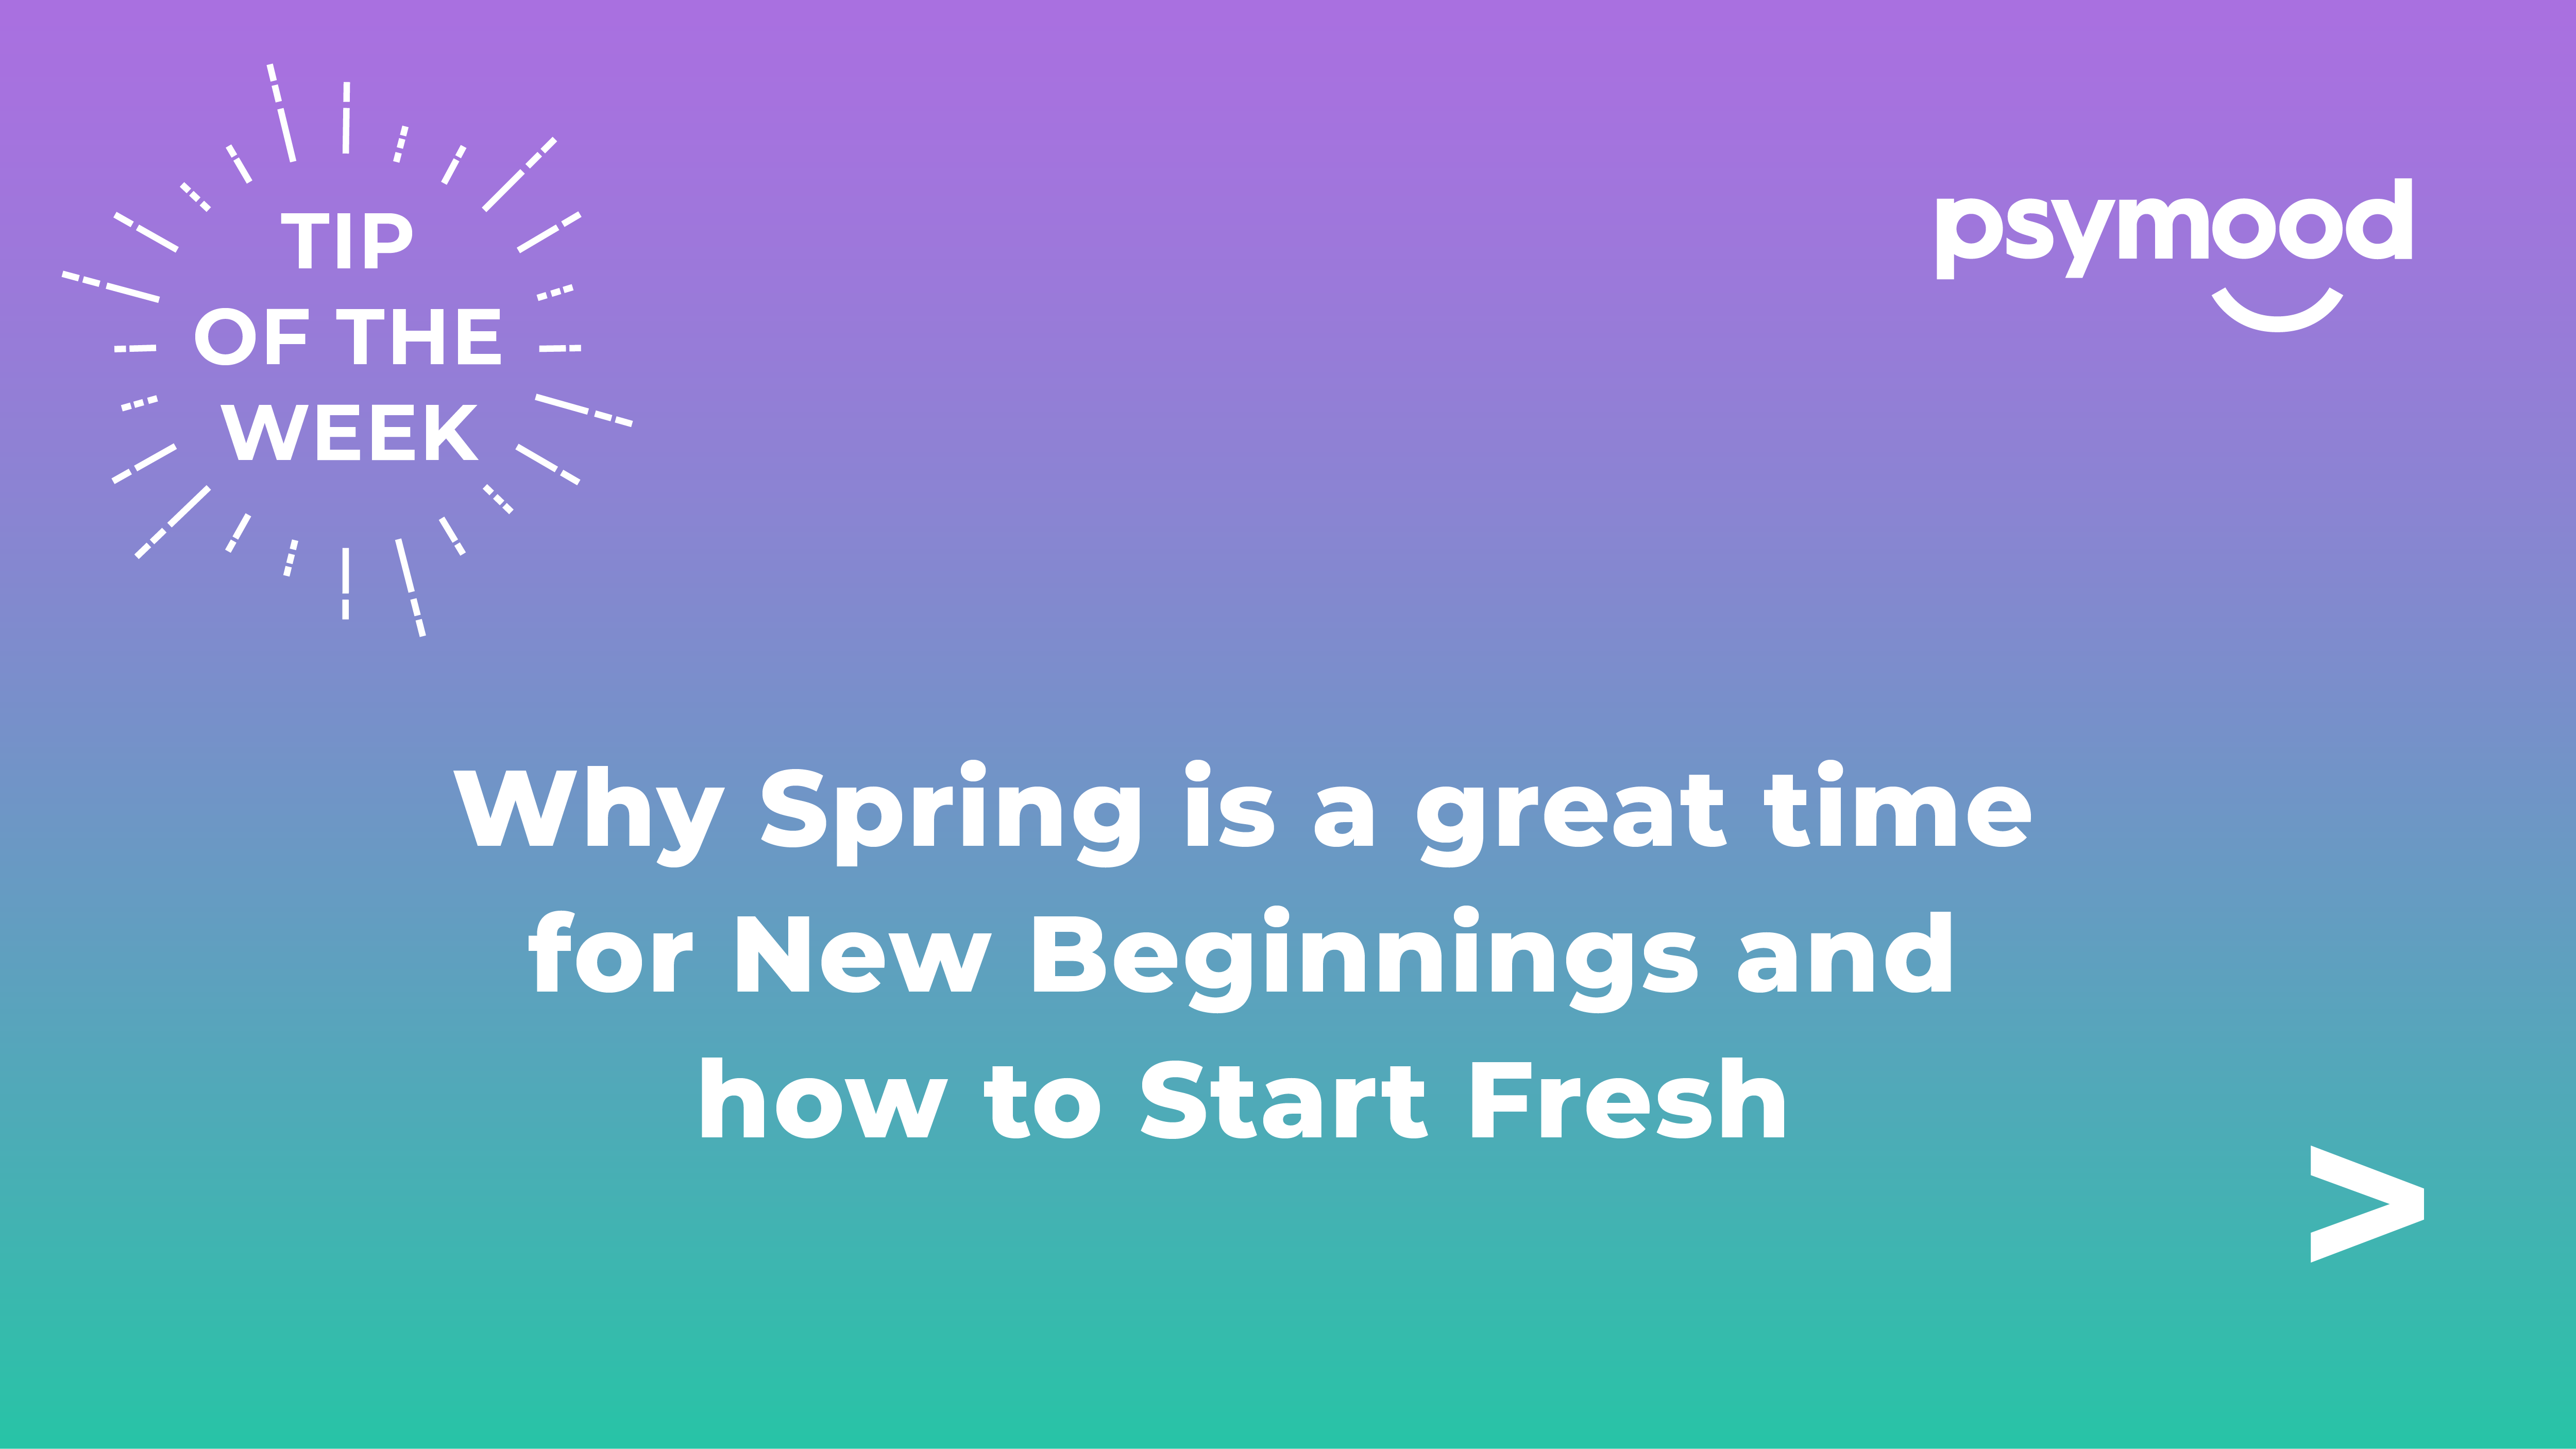 Why Spring is a great time for New Beginnings and how to Start Fresh